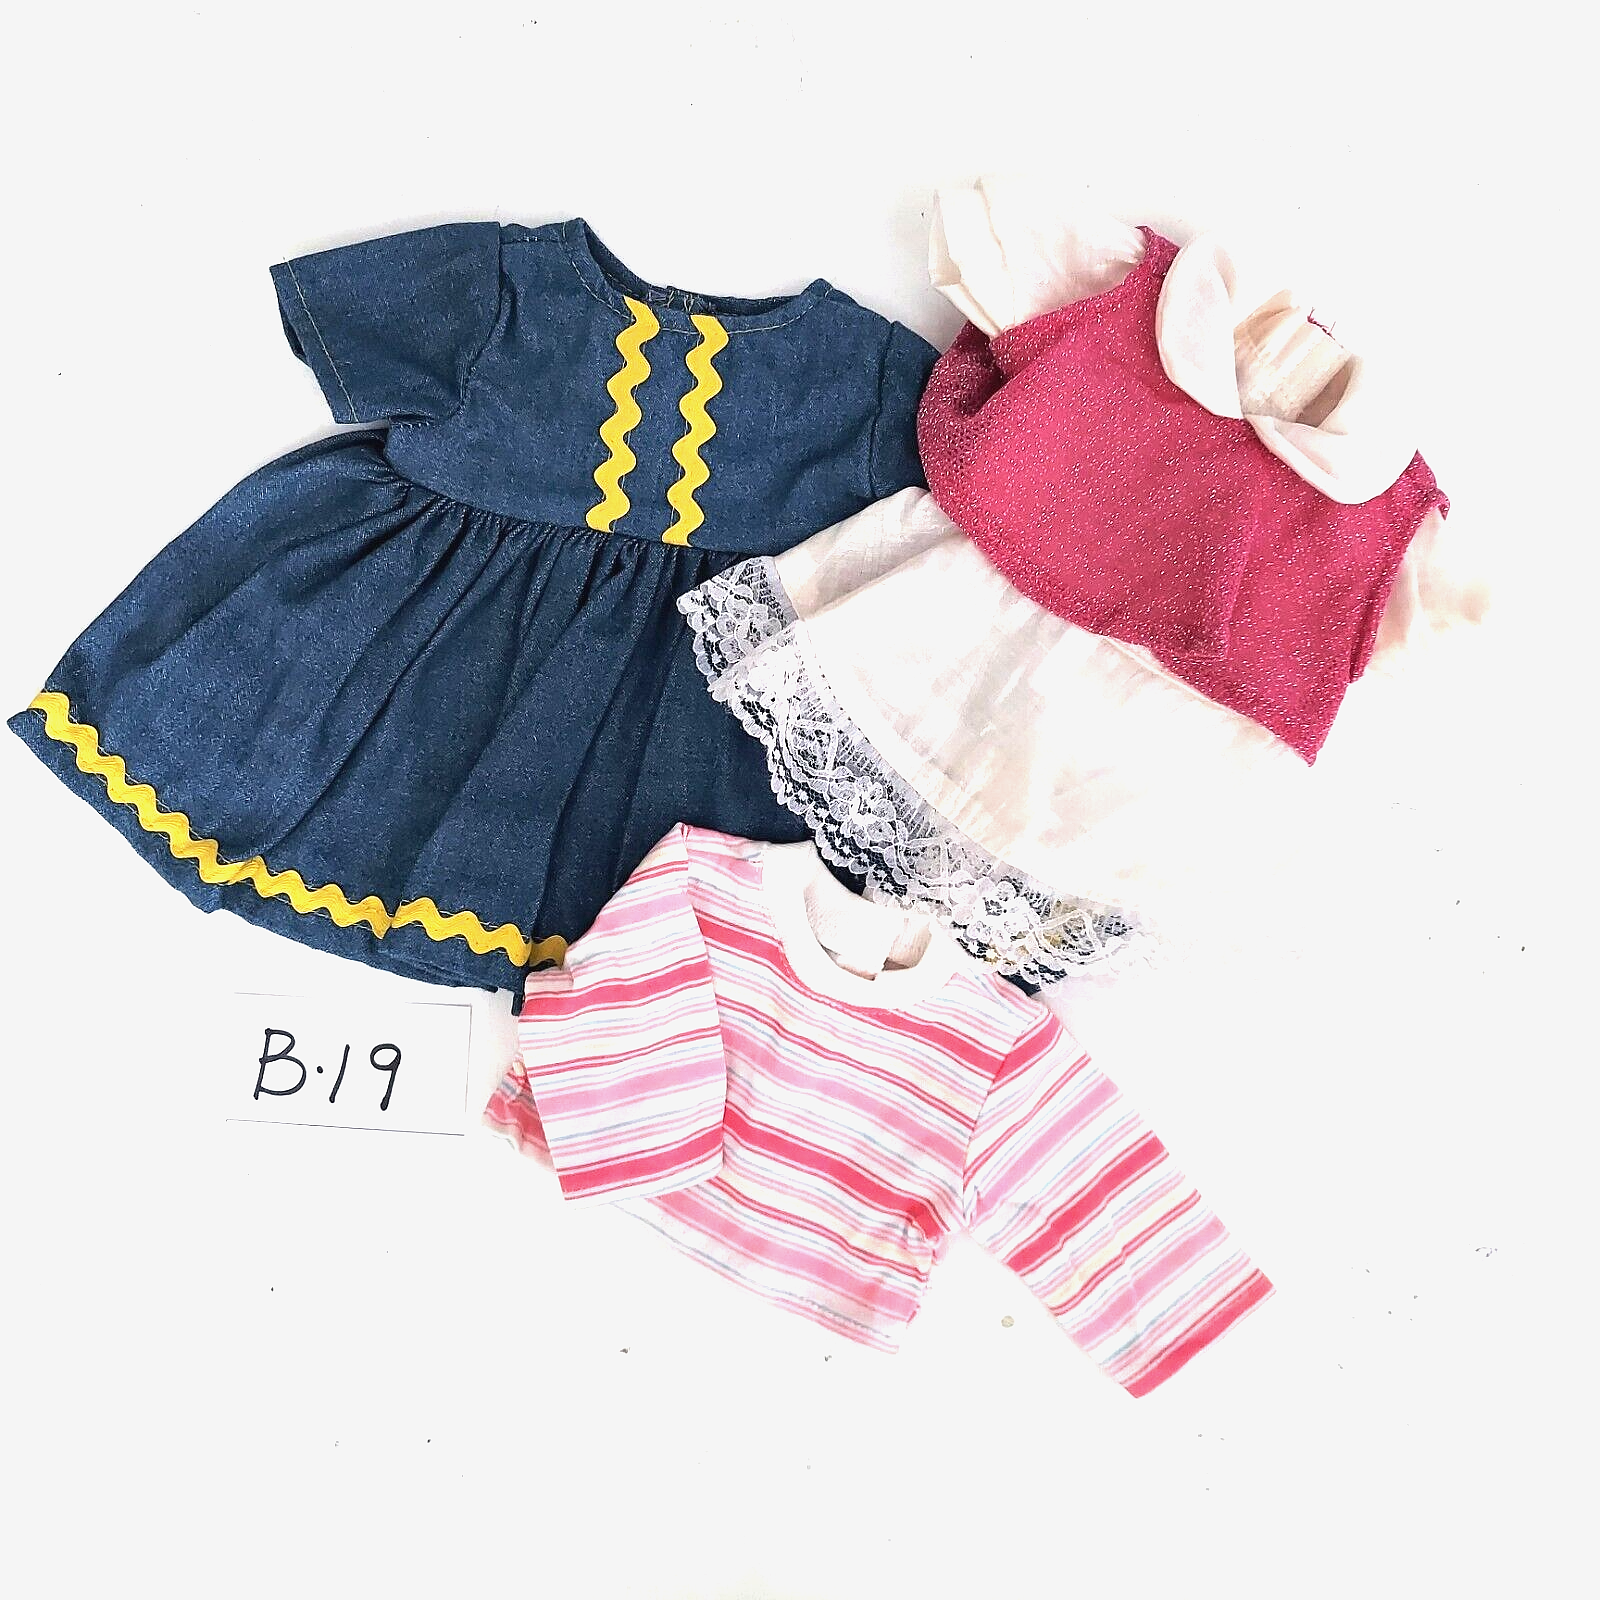 Doll Clothes # B19 fits 15 inch Am Girl Bity Boy. american doll clothing does not apply